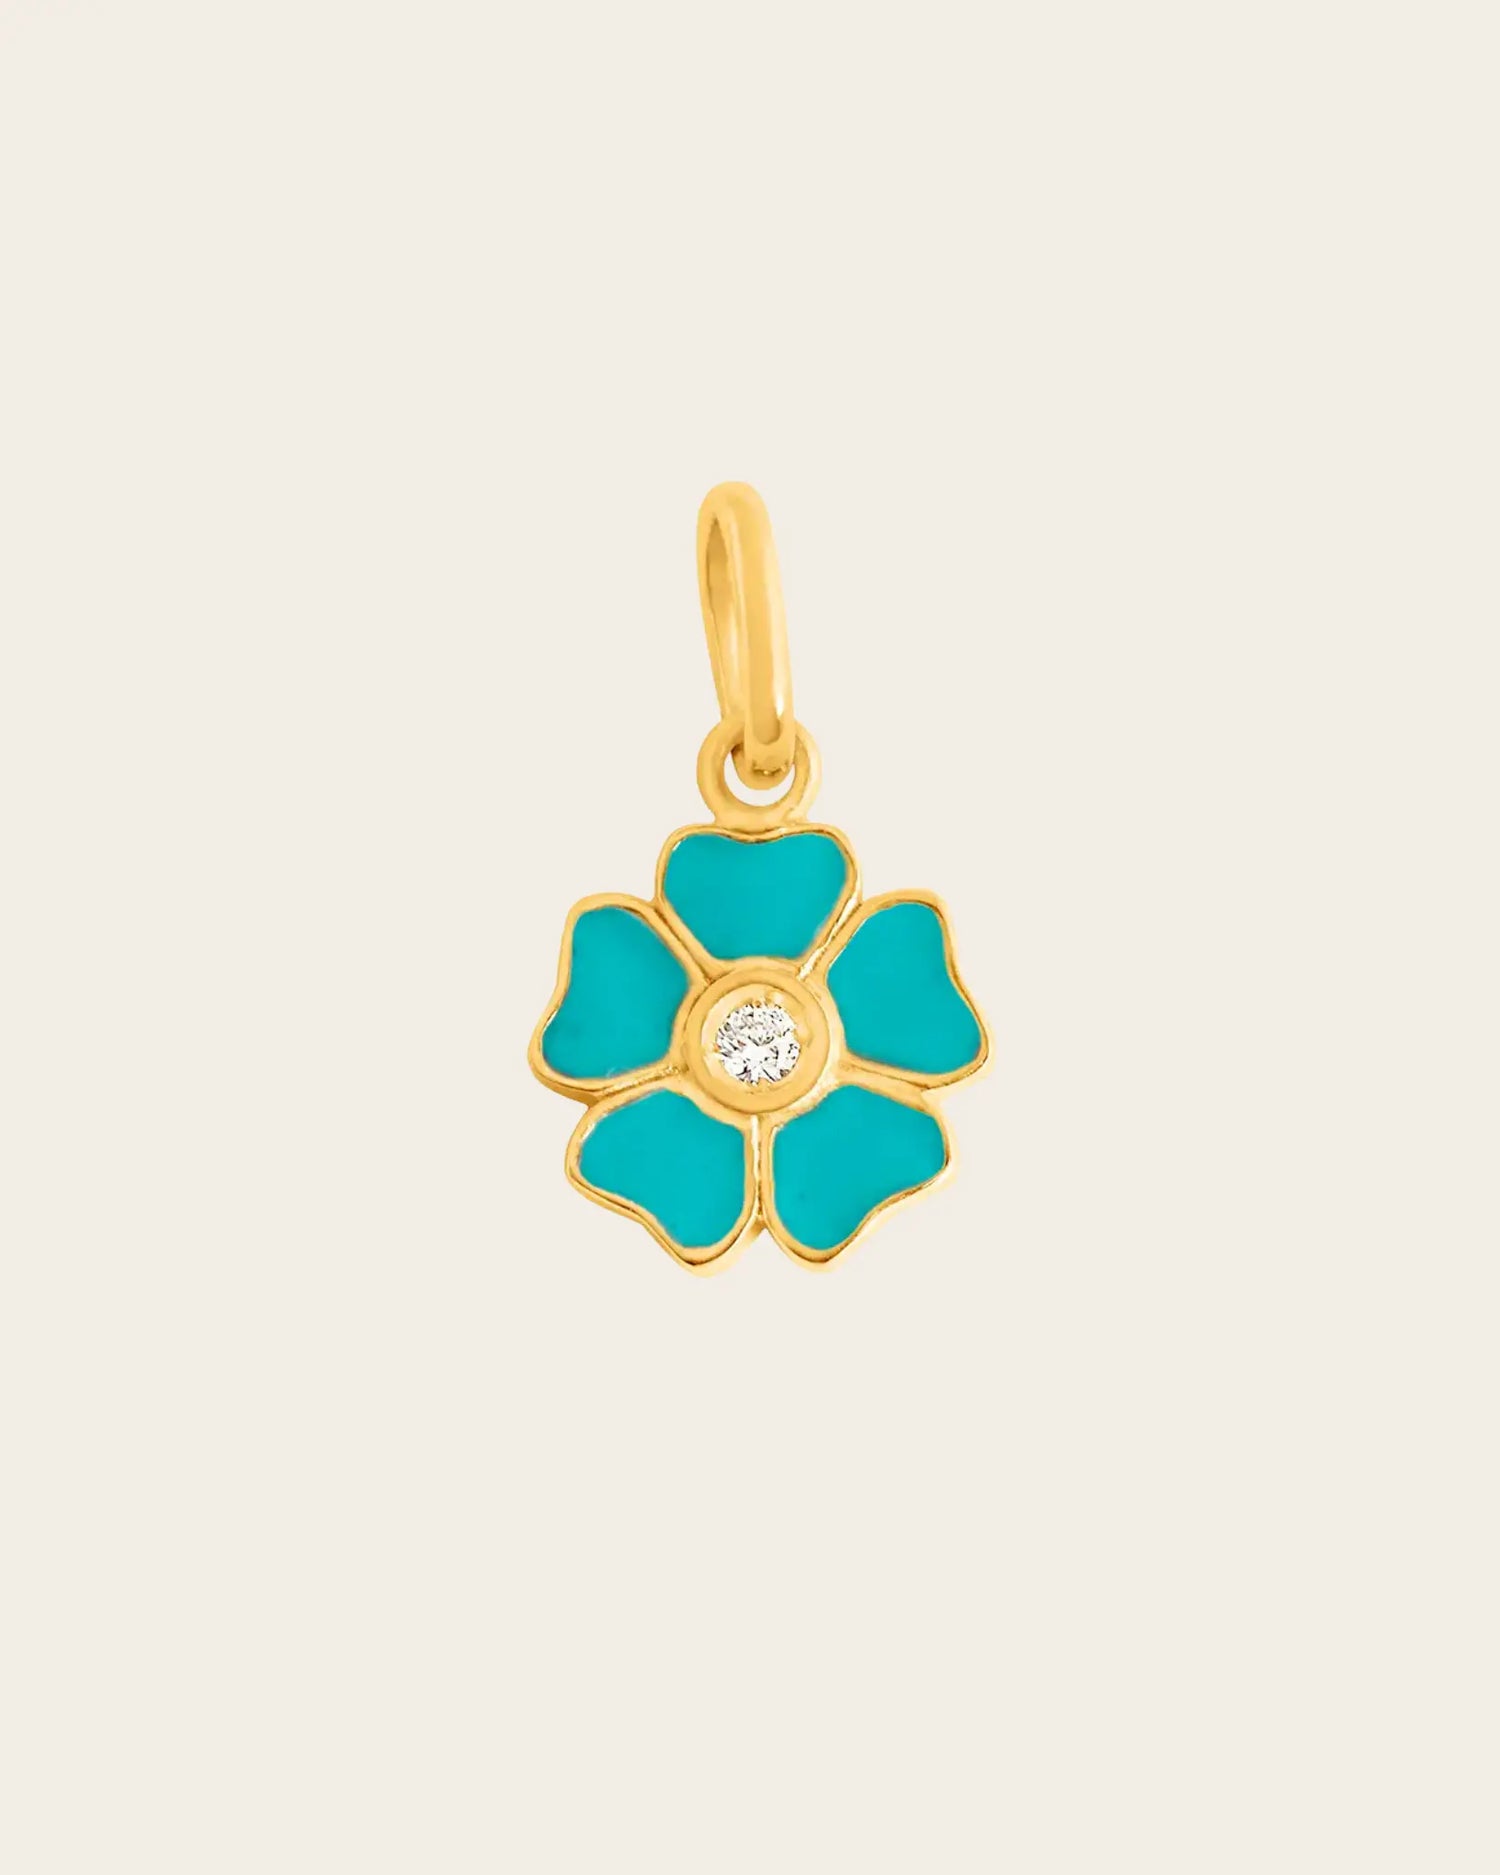 Turquoise Resin Flower Yellow Gold Charm Turquoise Resin Flower Yellow Gold Charm Gigi Clozeau Gigi Clozeau  Squash Blossom Vail